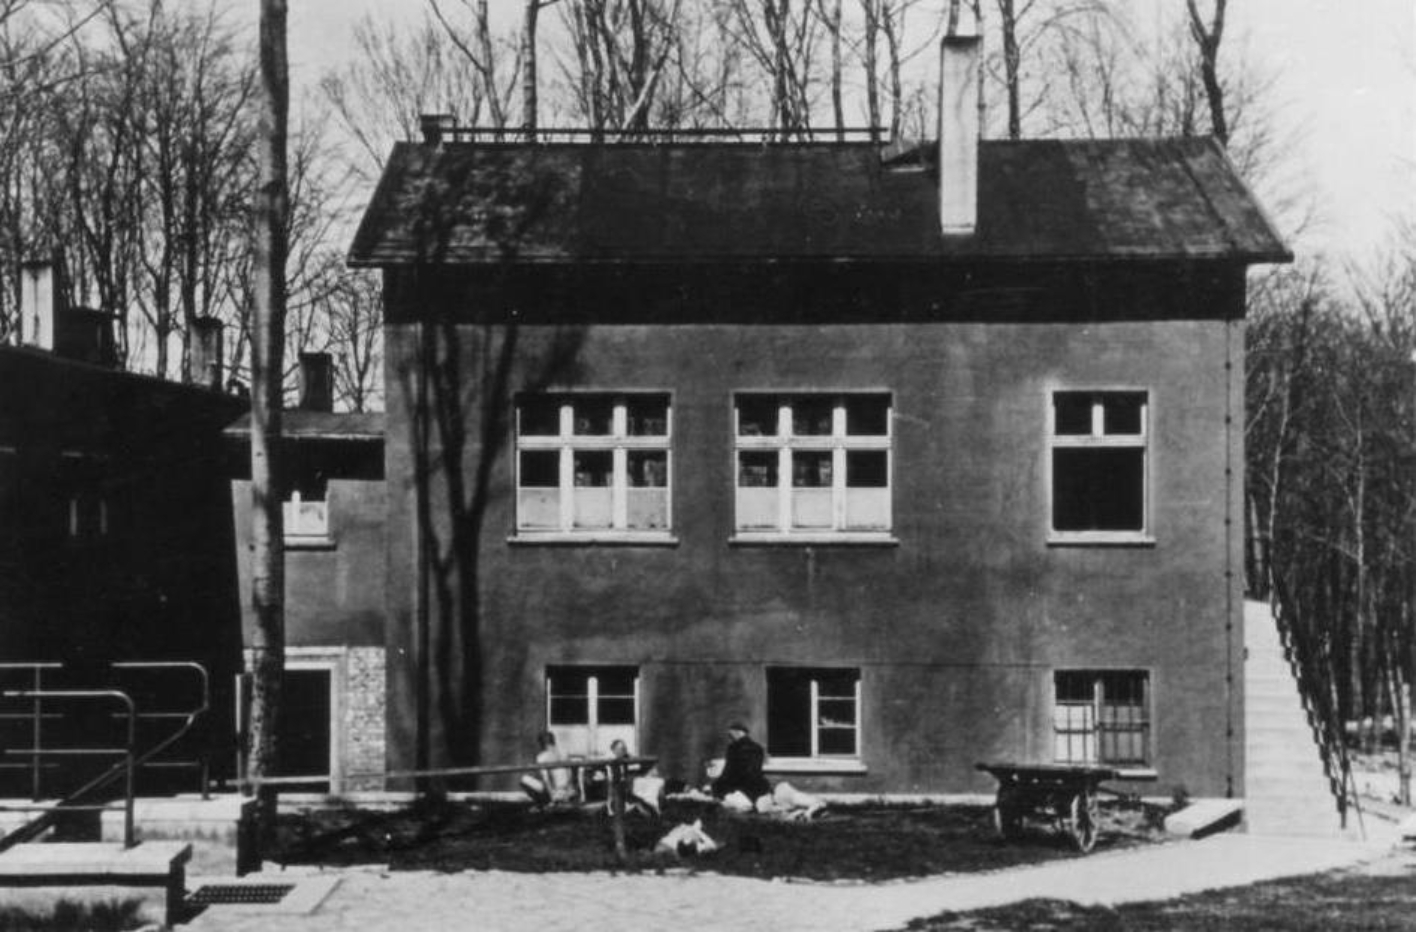 Frontal view of the building that housed Operation Area II of the prisoner infirmary. A few barely clothed prisoners lie and sit in front of the house